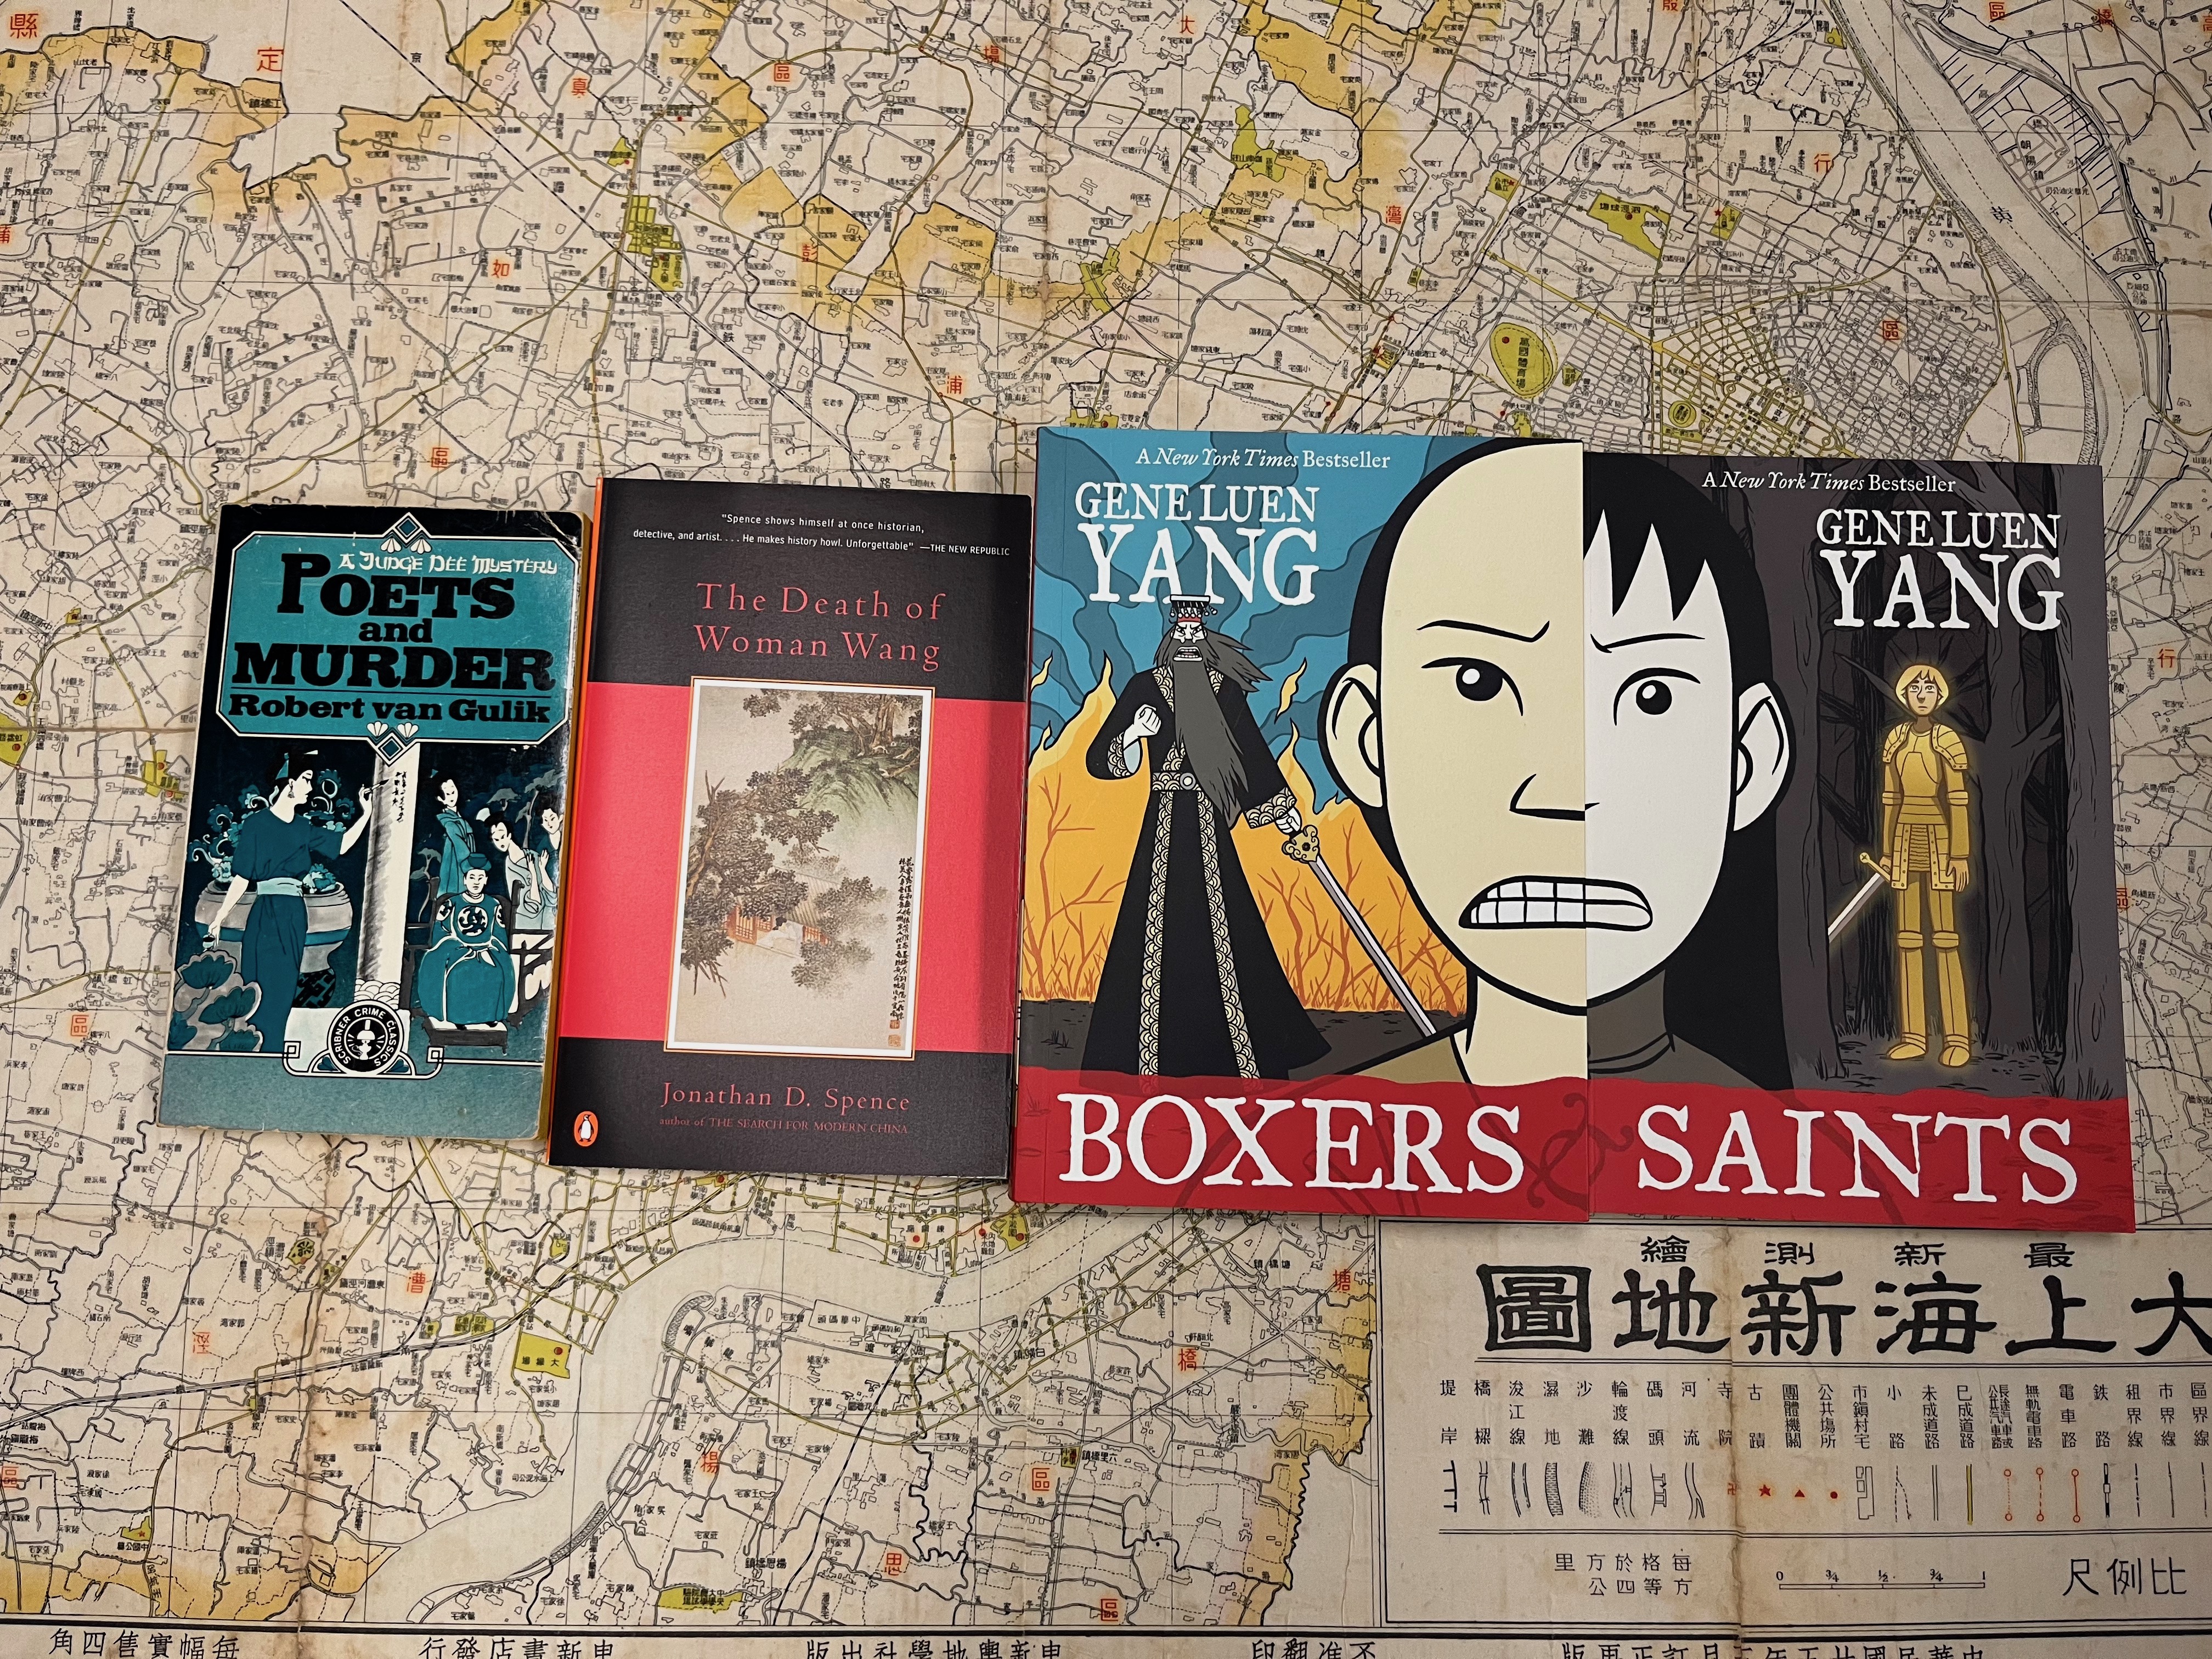 Four books lie on top of a historic map of Shanghai. The books are Poets and Murder, The Death of Woman Wang, Boxers, and Saints.